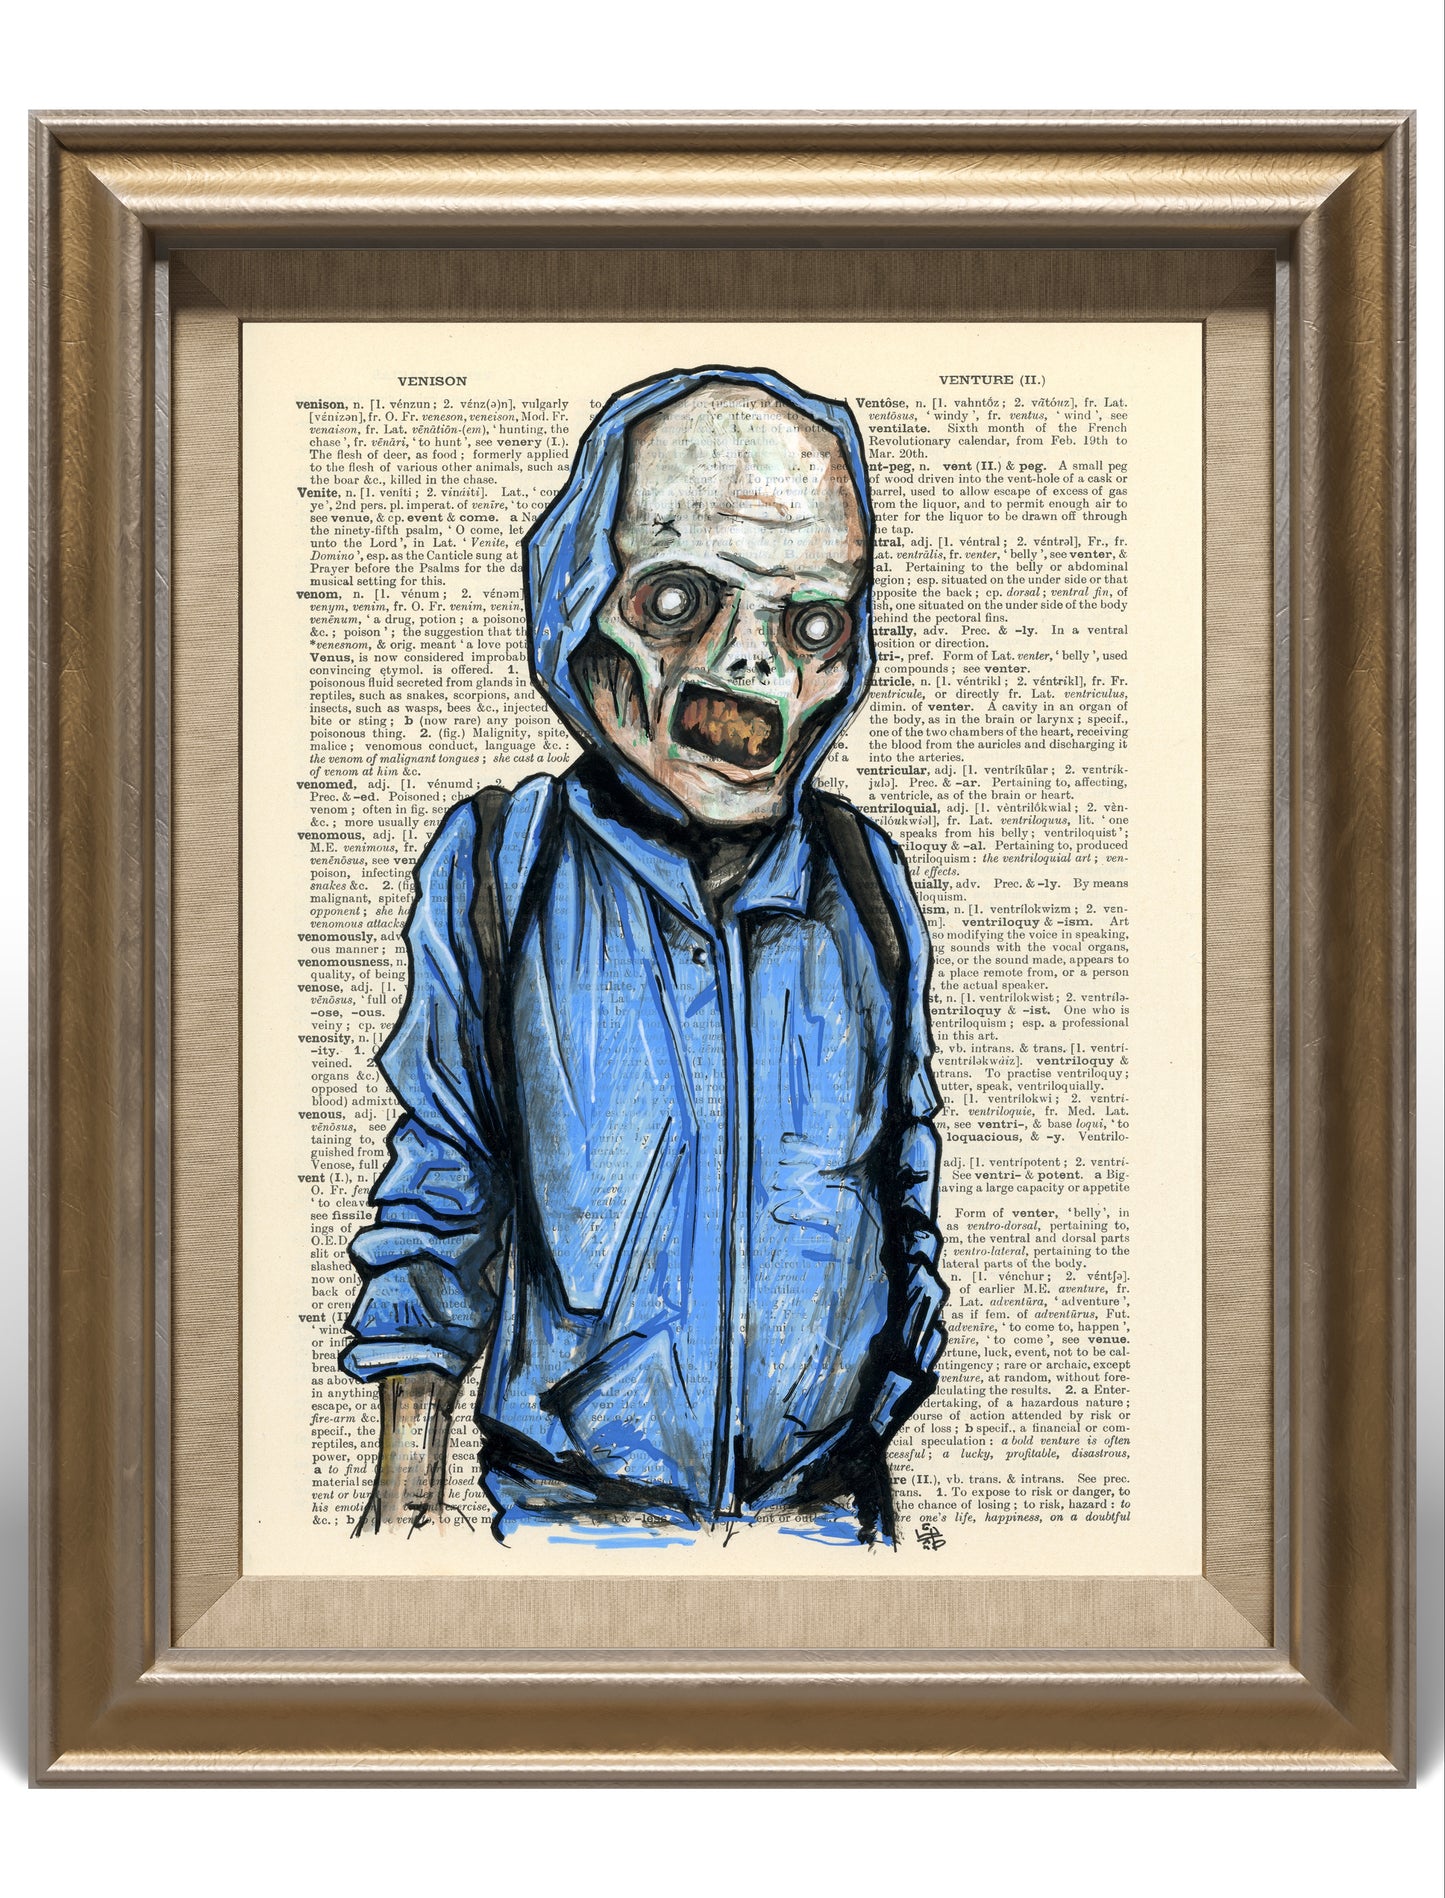 Zombie Art - An unsettling portrayal of the undead.